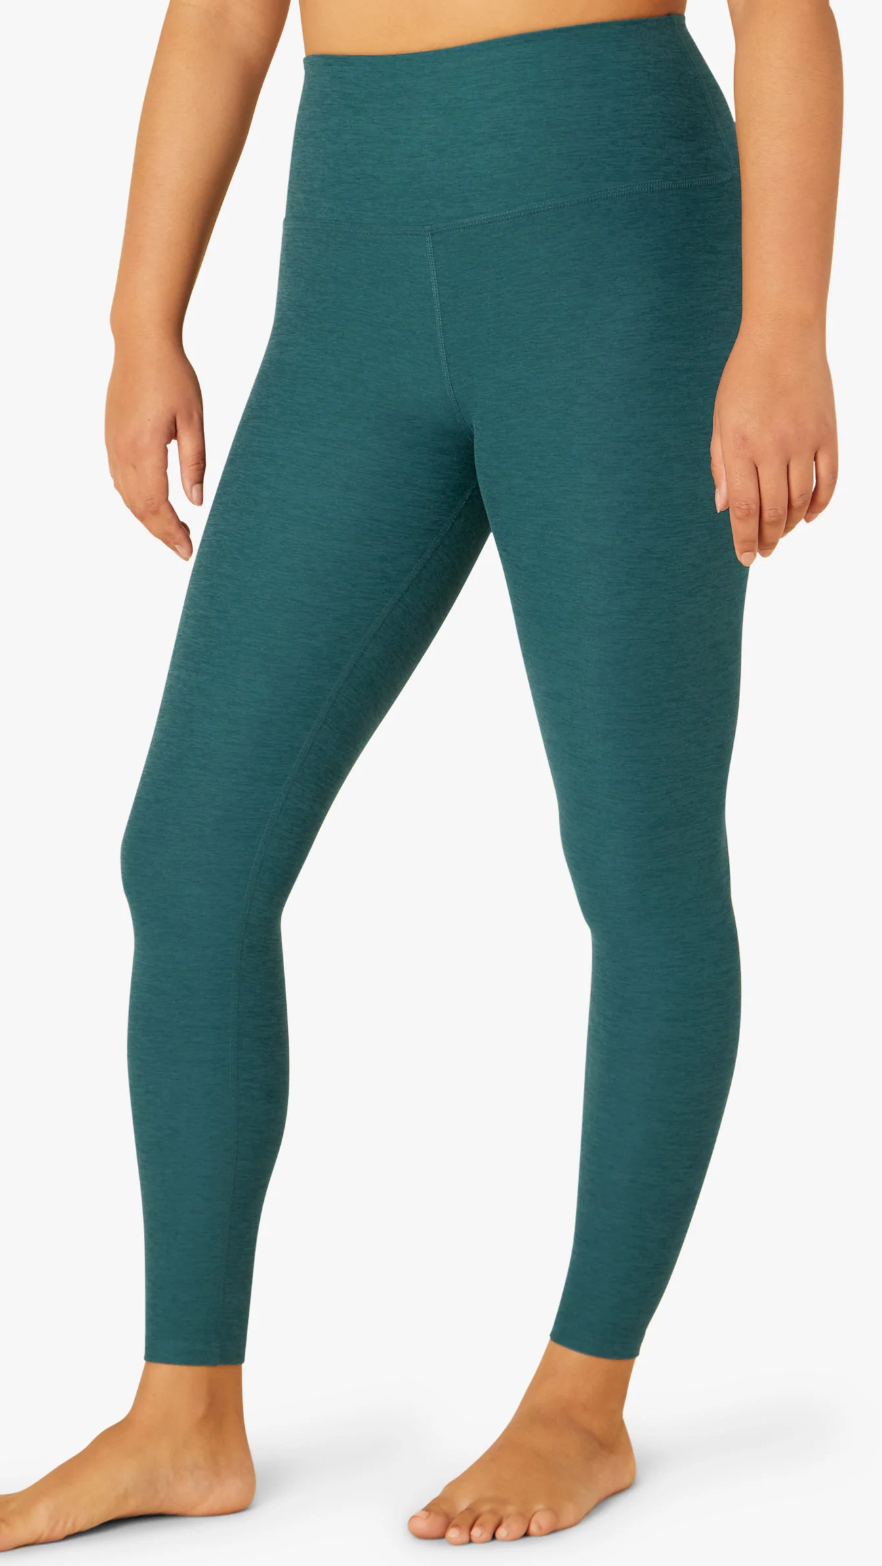 Beyond Yoga High Waisted Alloy Ombre Midi Legging Navy/Gold SF3243